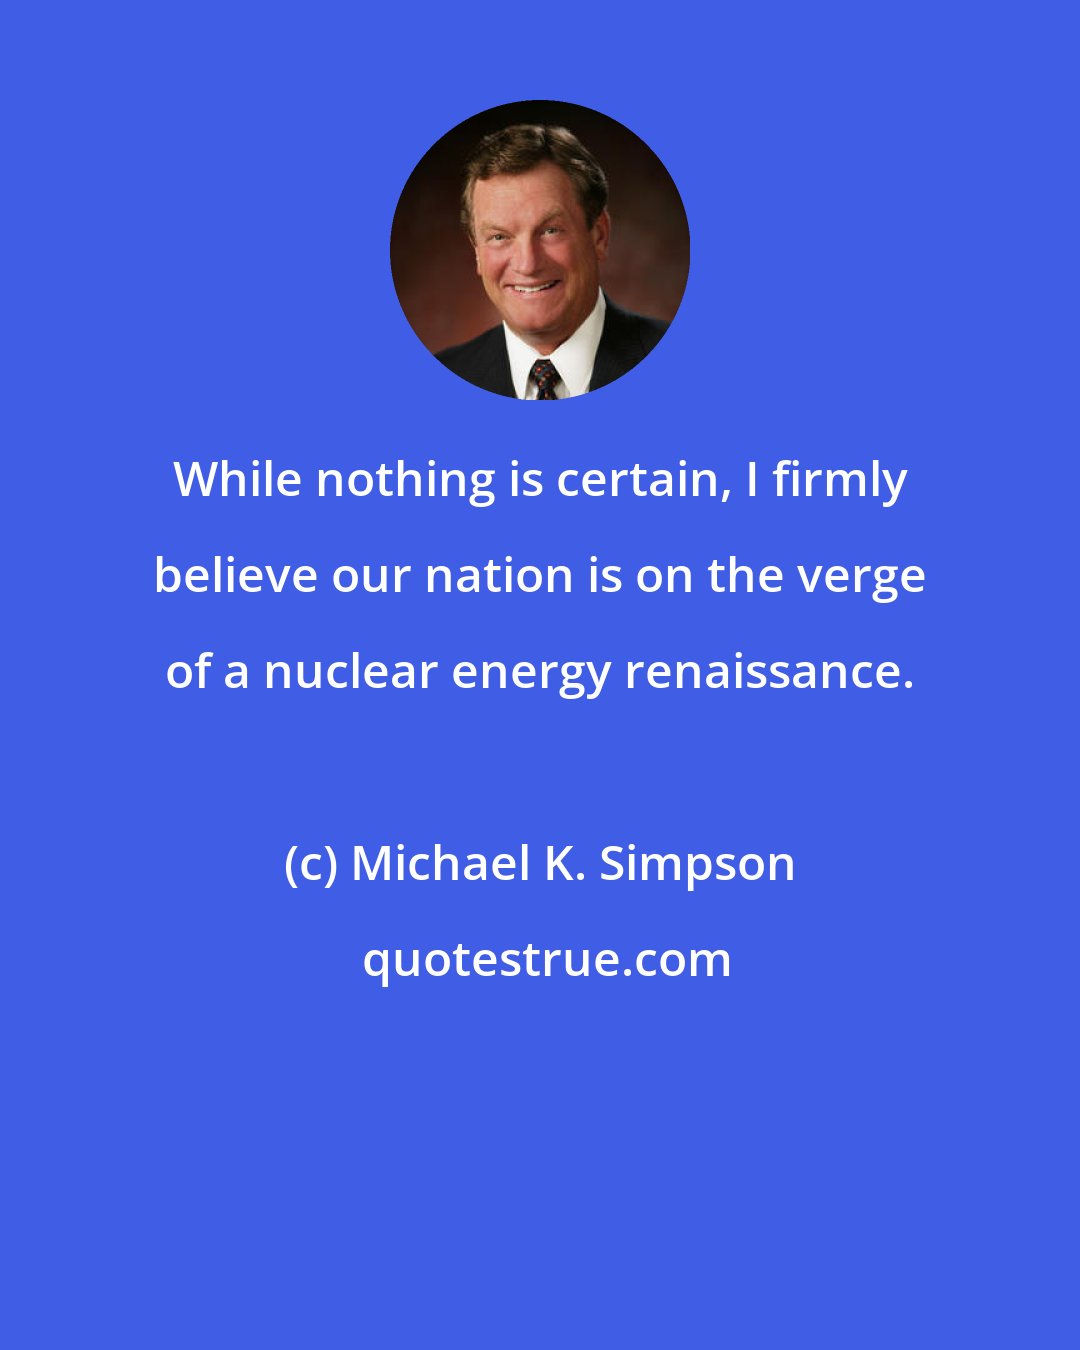 Michael K. Simpson: While nothing is certain, I firmly believe our nation is on the verge of a nuclear energy renaissance.